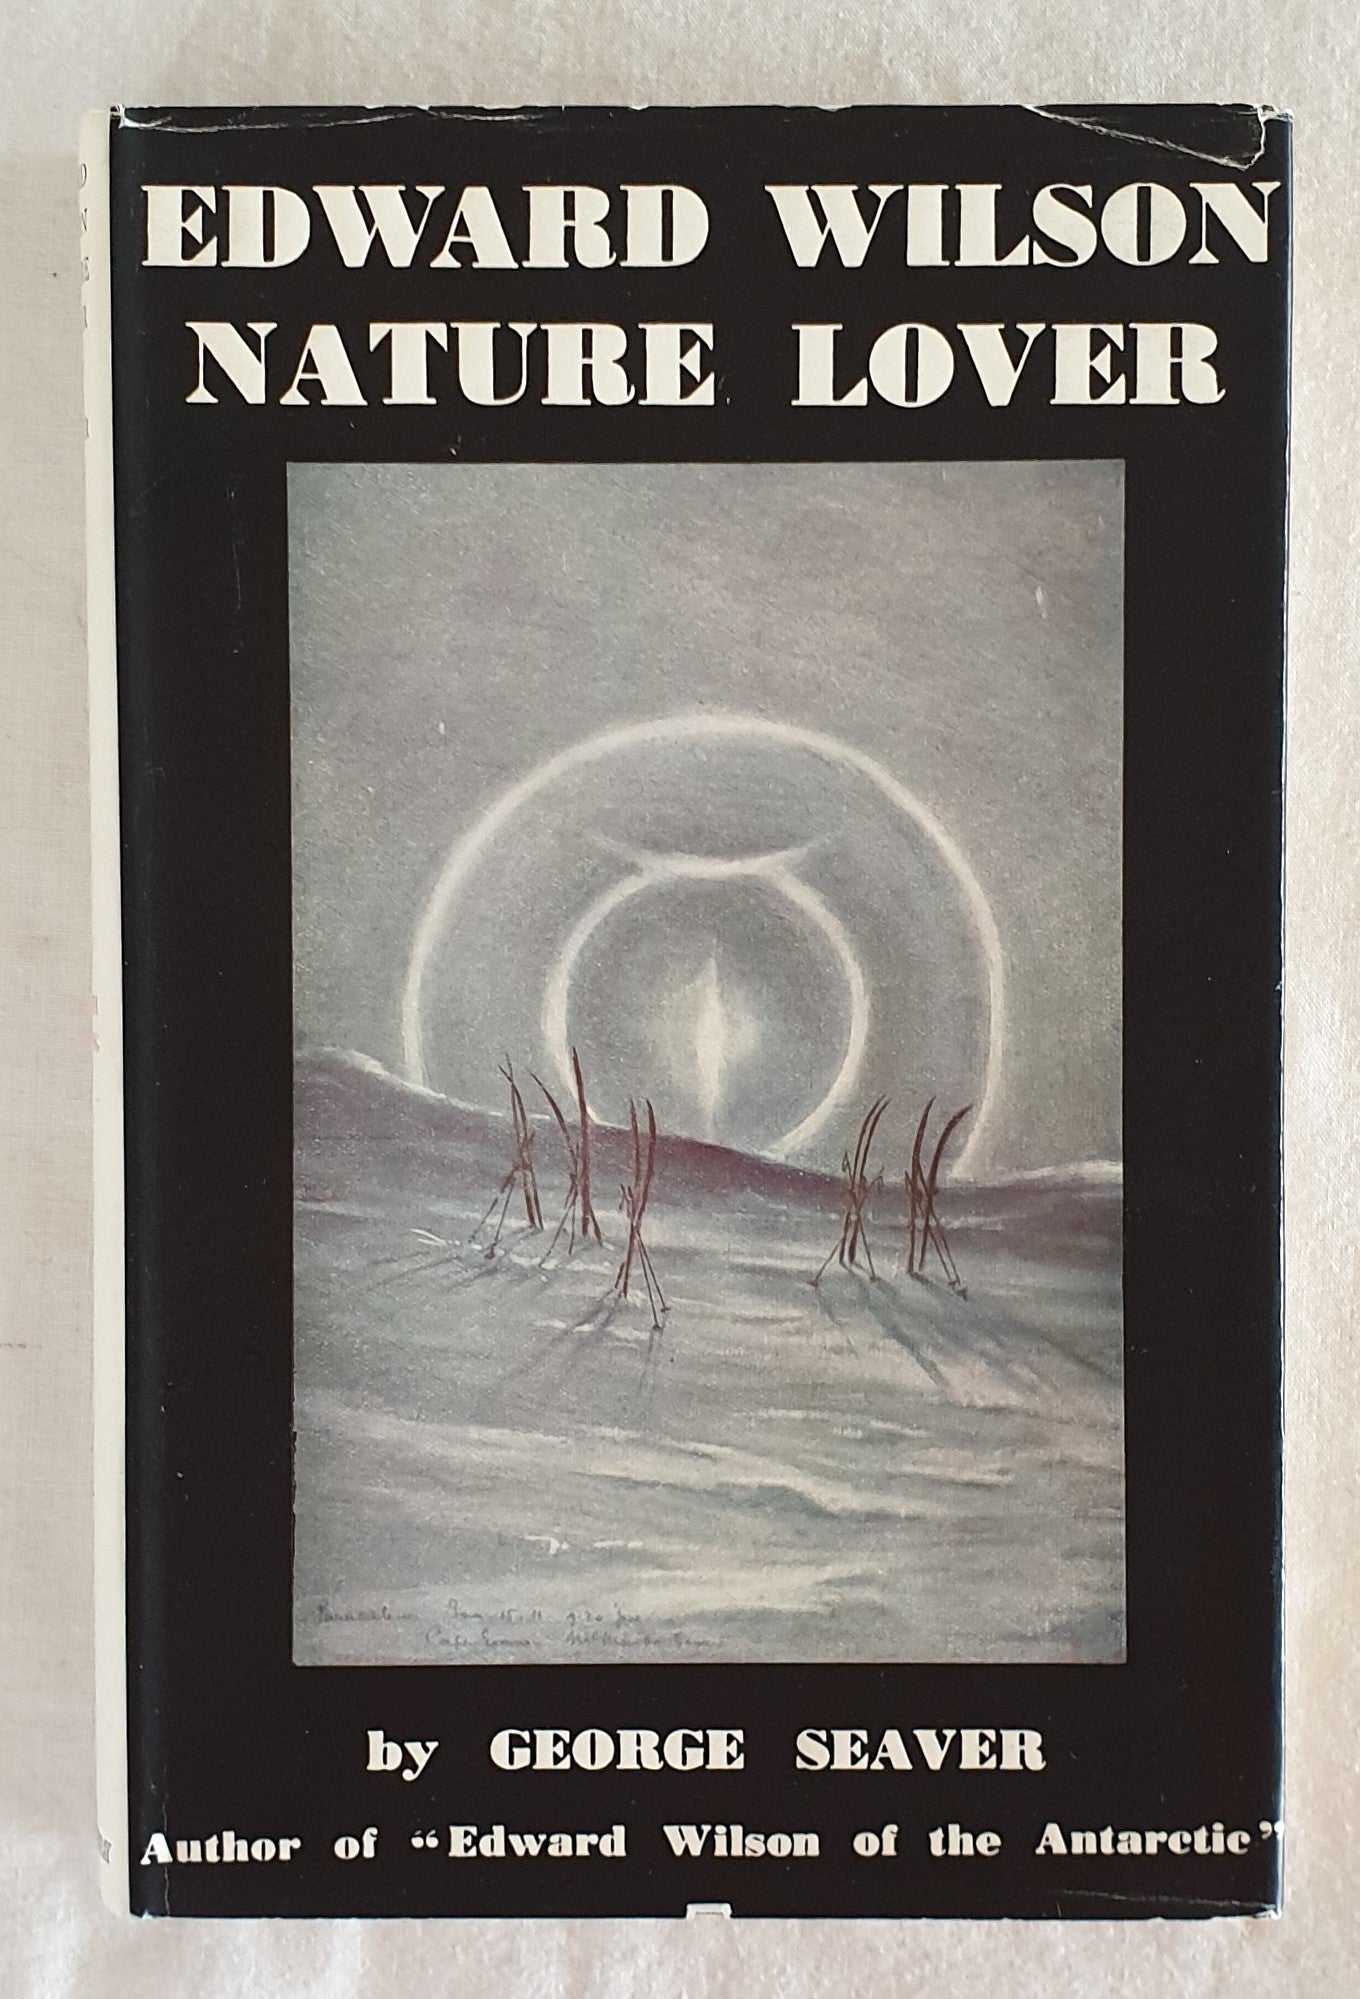 Edward Wilson Nature Lover by George Seaver